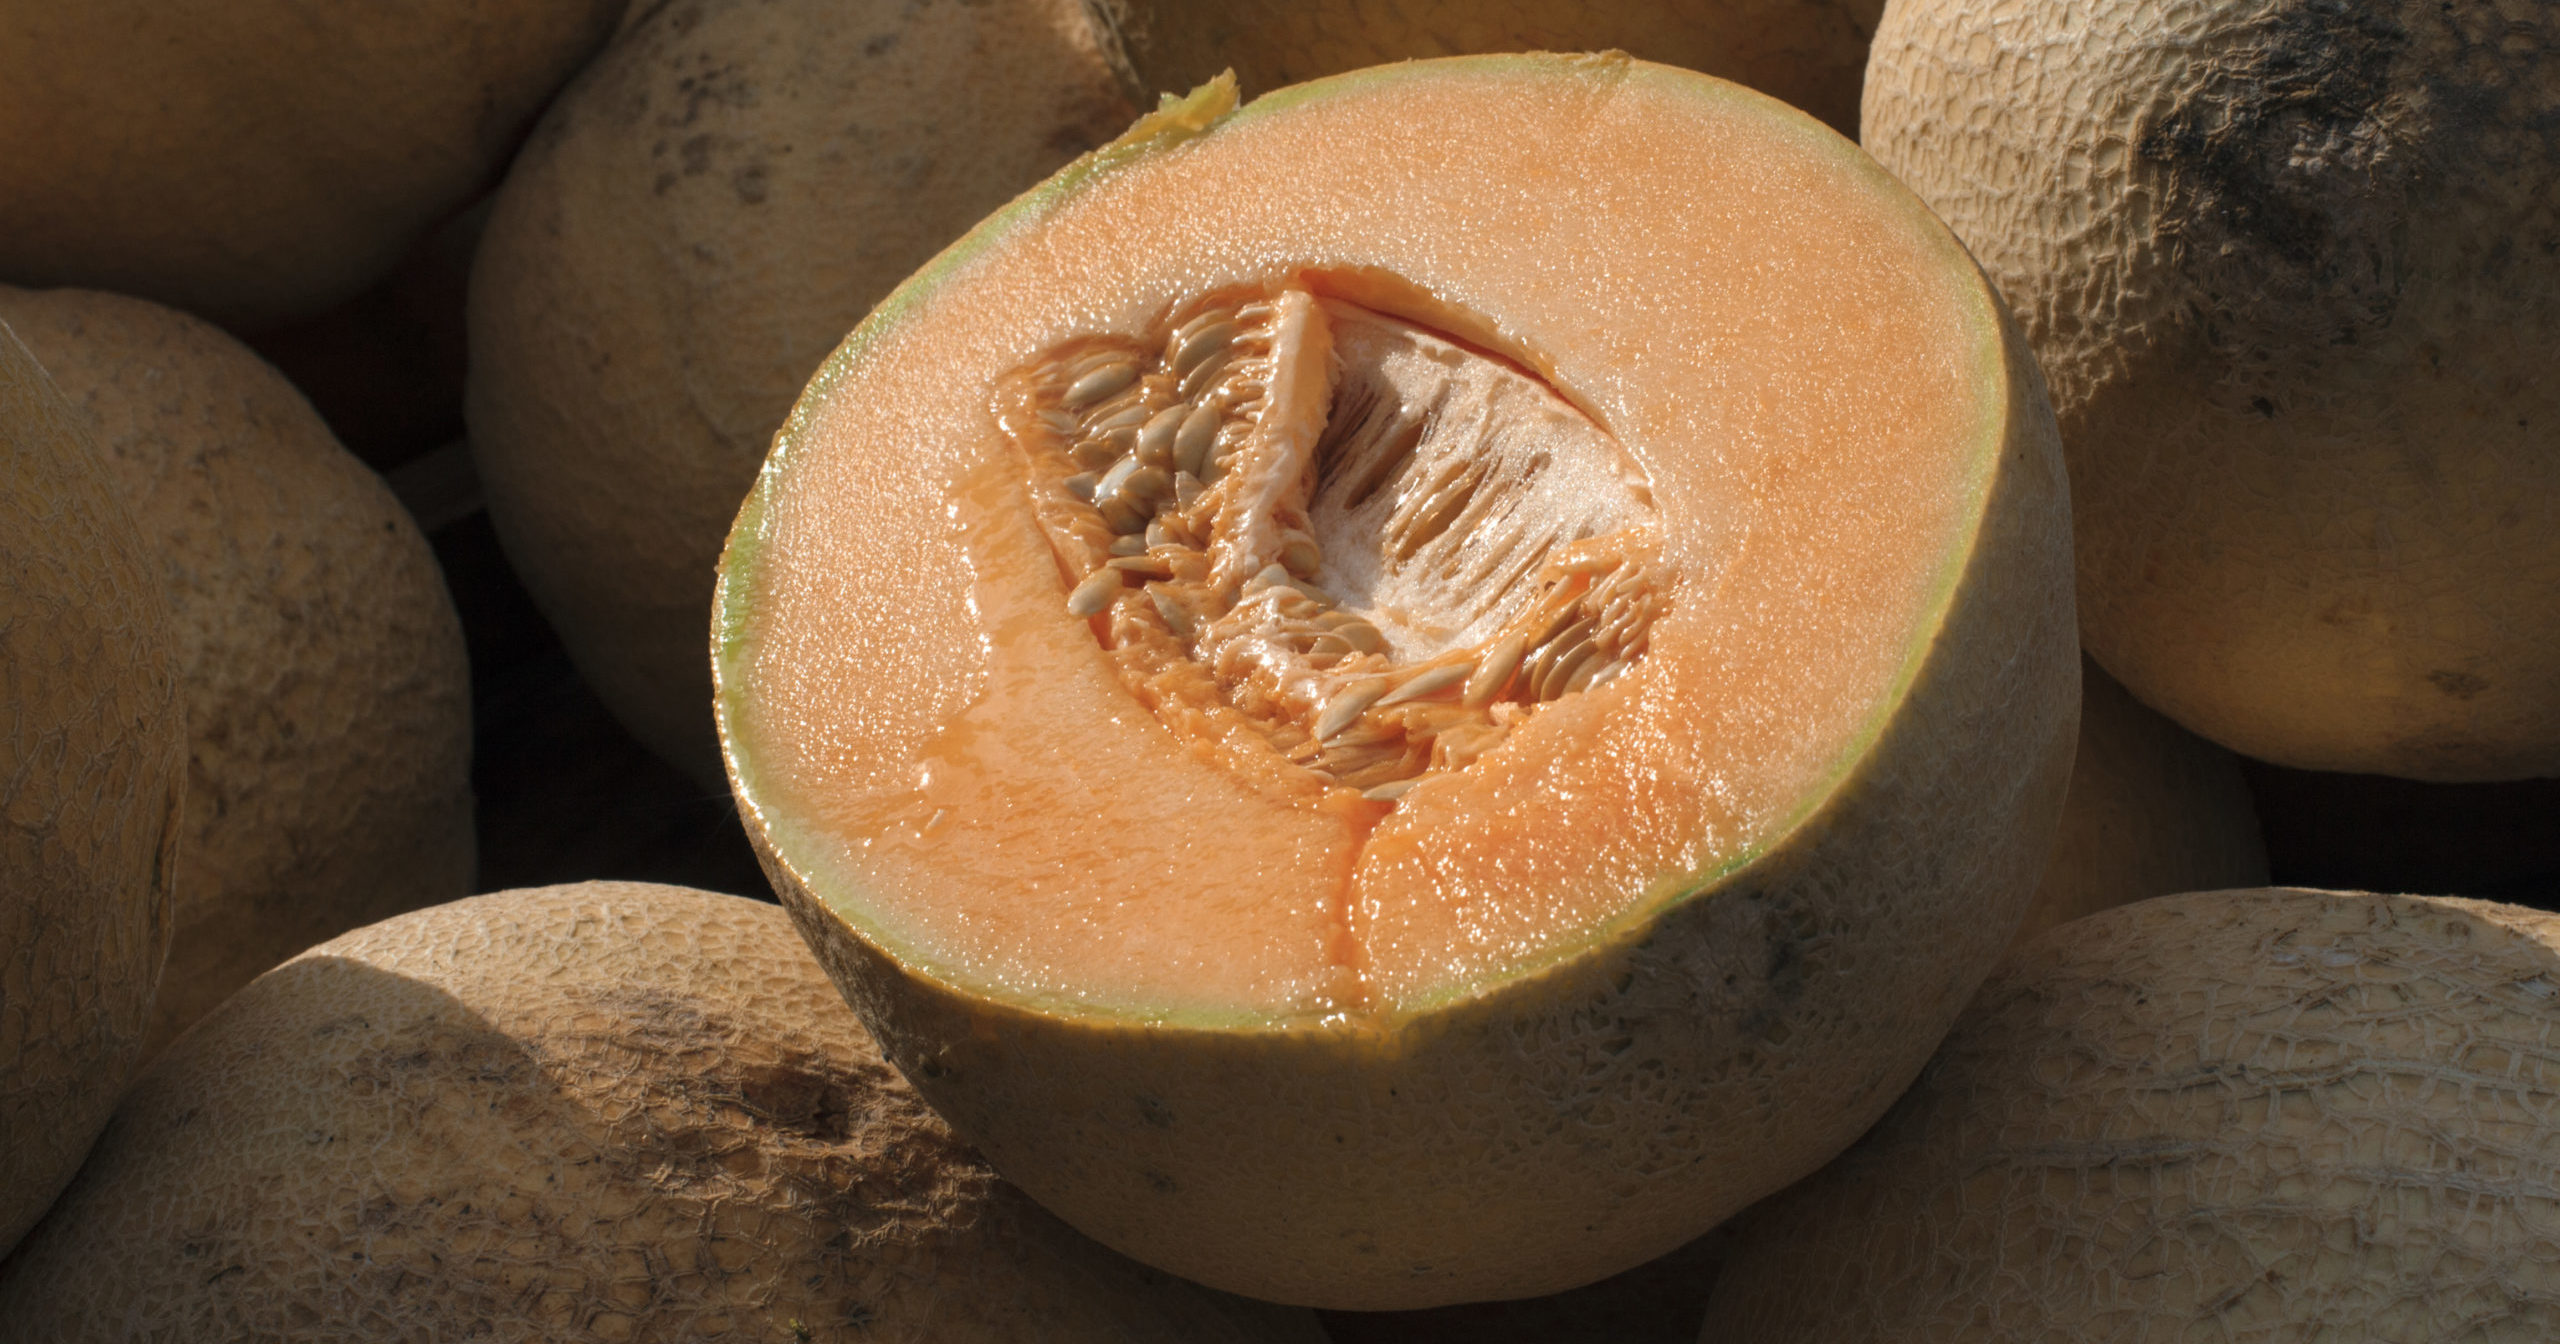 Cantaloupes are displayed for sale in Virginia on July 28, 2017.